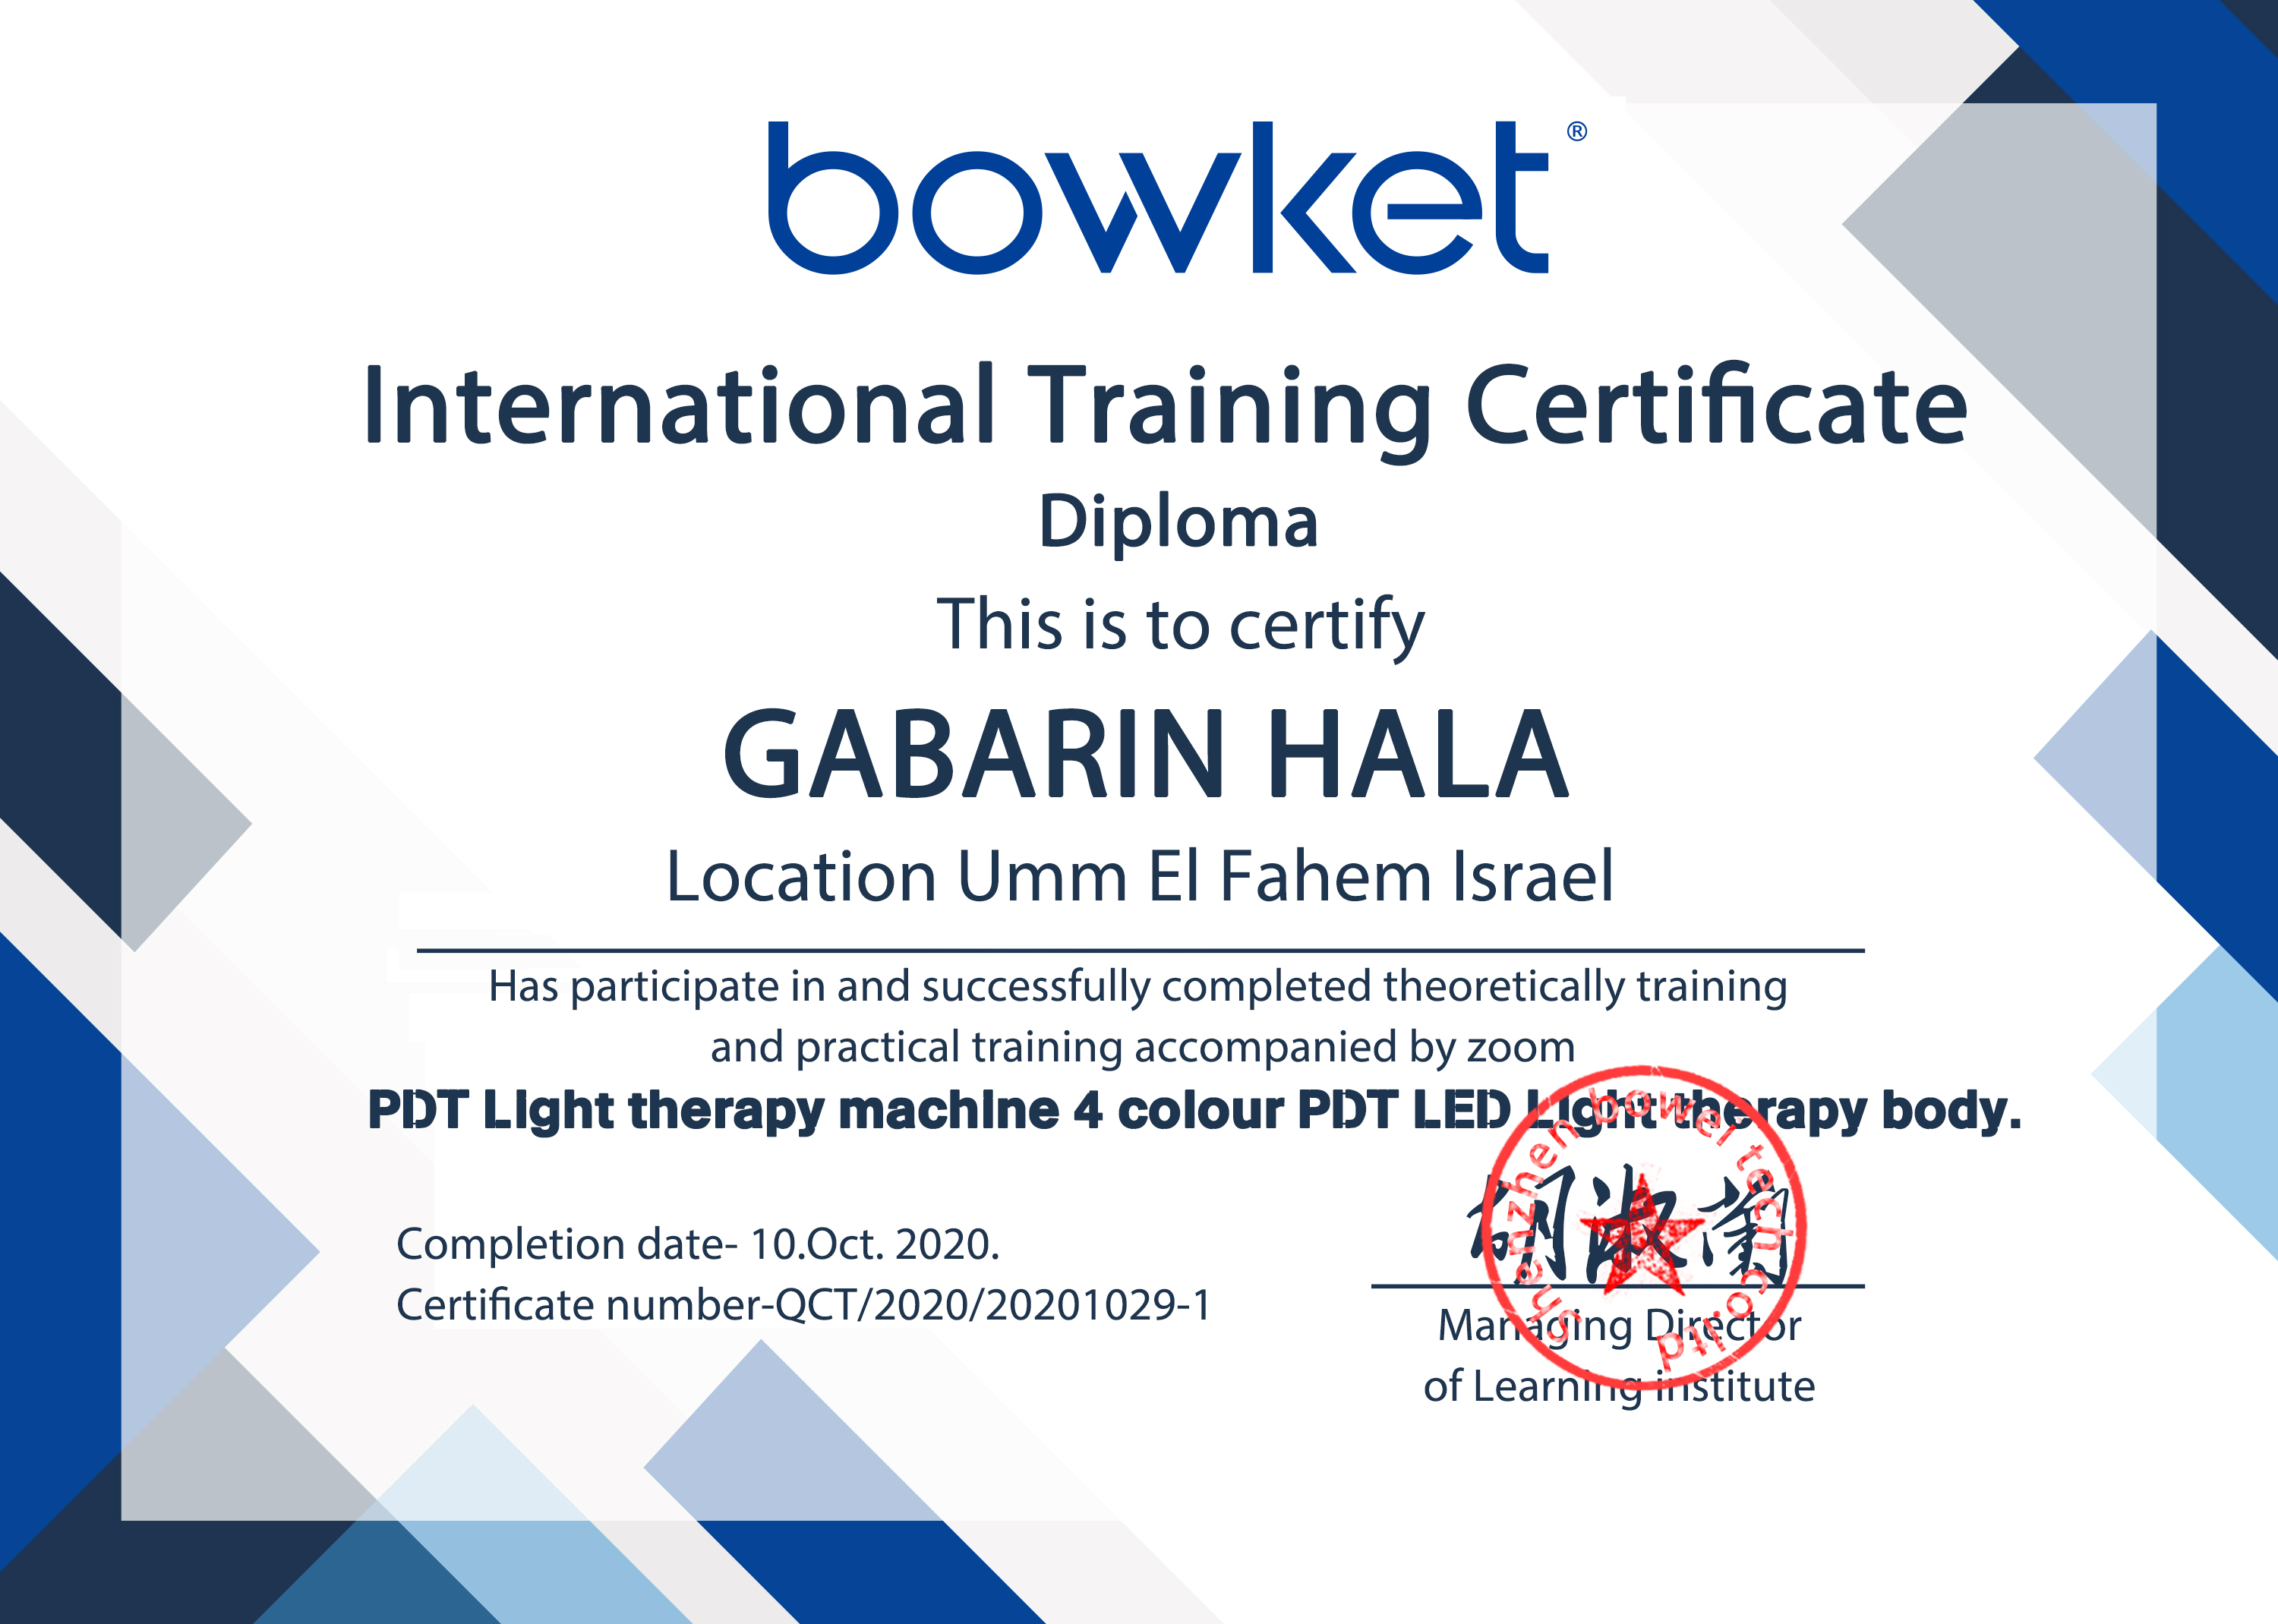 Join us today and win certificate free ,congratualtion Dr GABARIN HALA !(image 1)